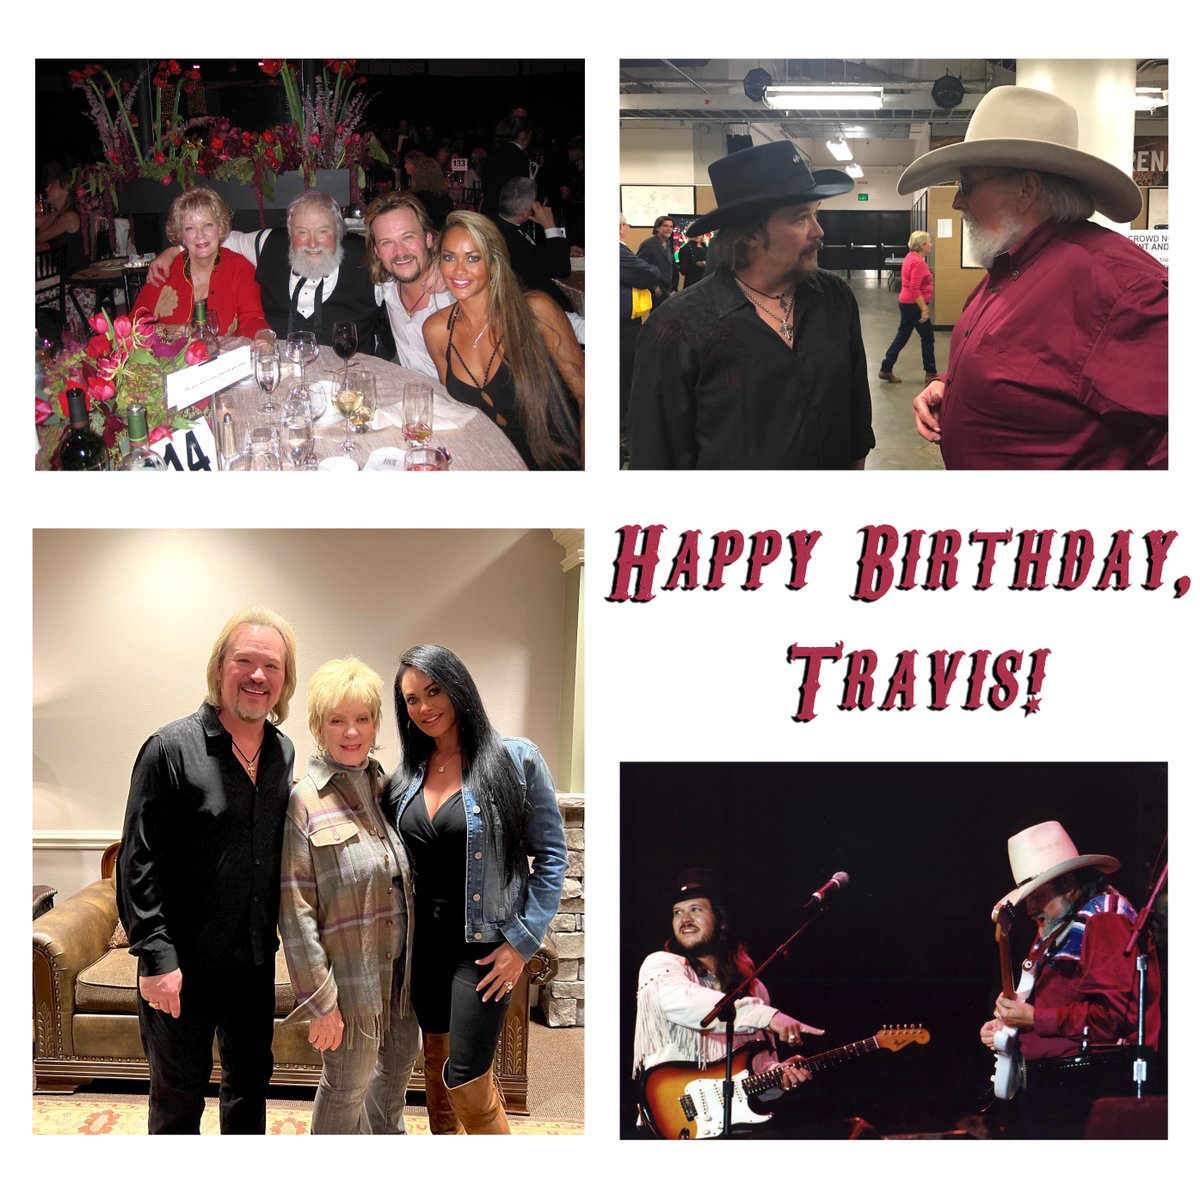 The Daniels Family would like to wish our Georgia family - and as Dad always called him, his 'itty bitty buddy' - @Travistritt a very happy 61st birthday! Happy Birthday, Travis! - CD Jr.